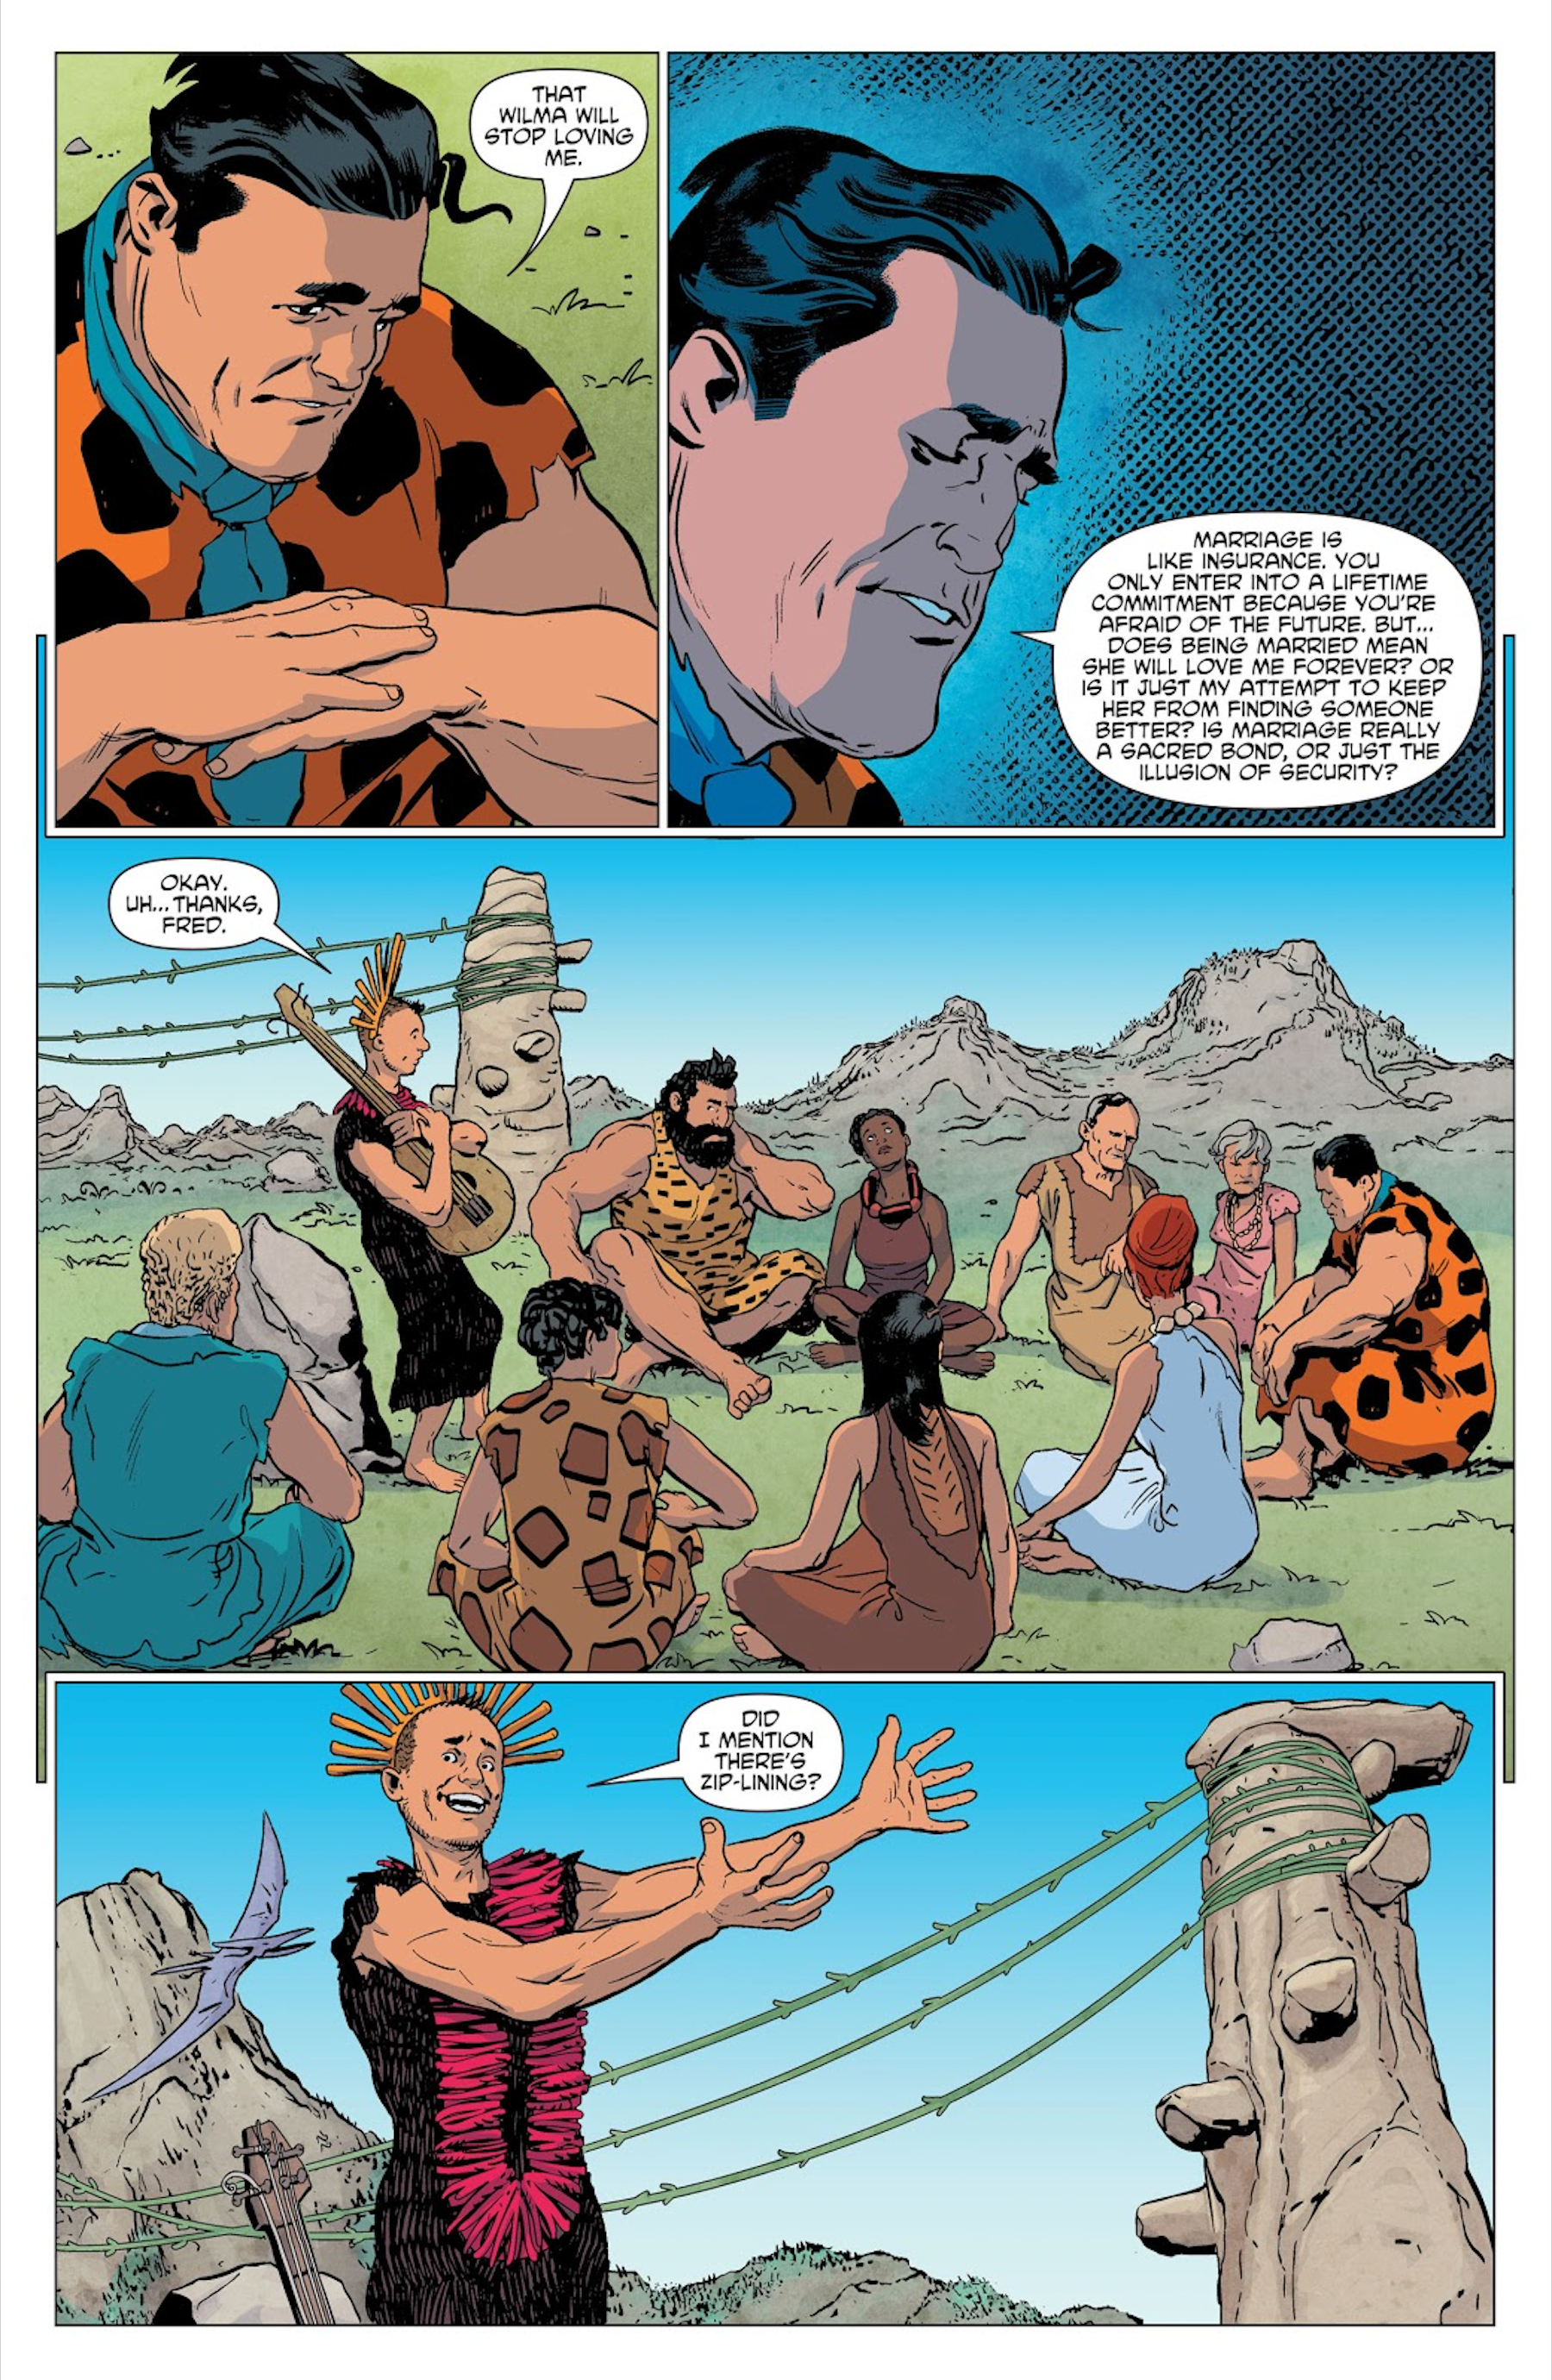 Fred Flintstone has doubts about marriage